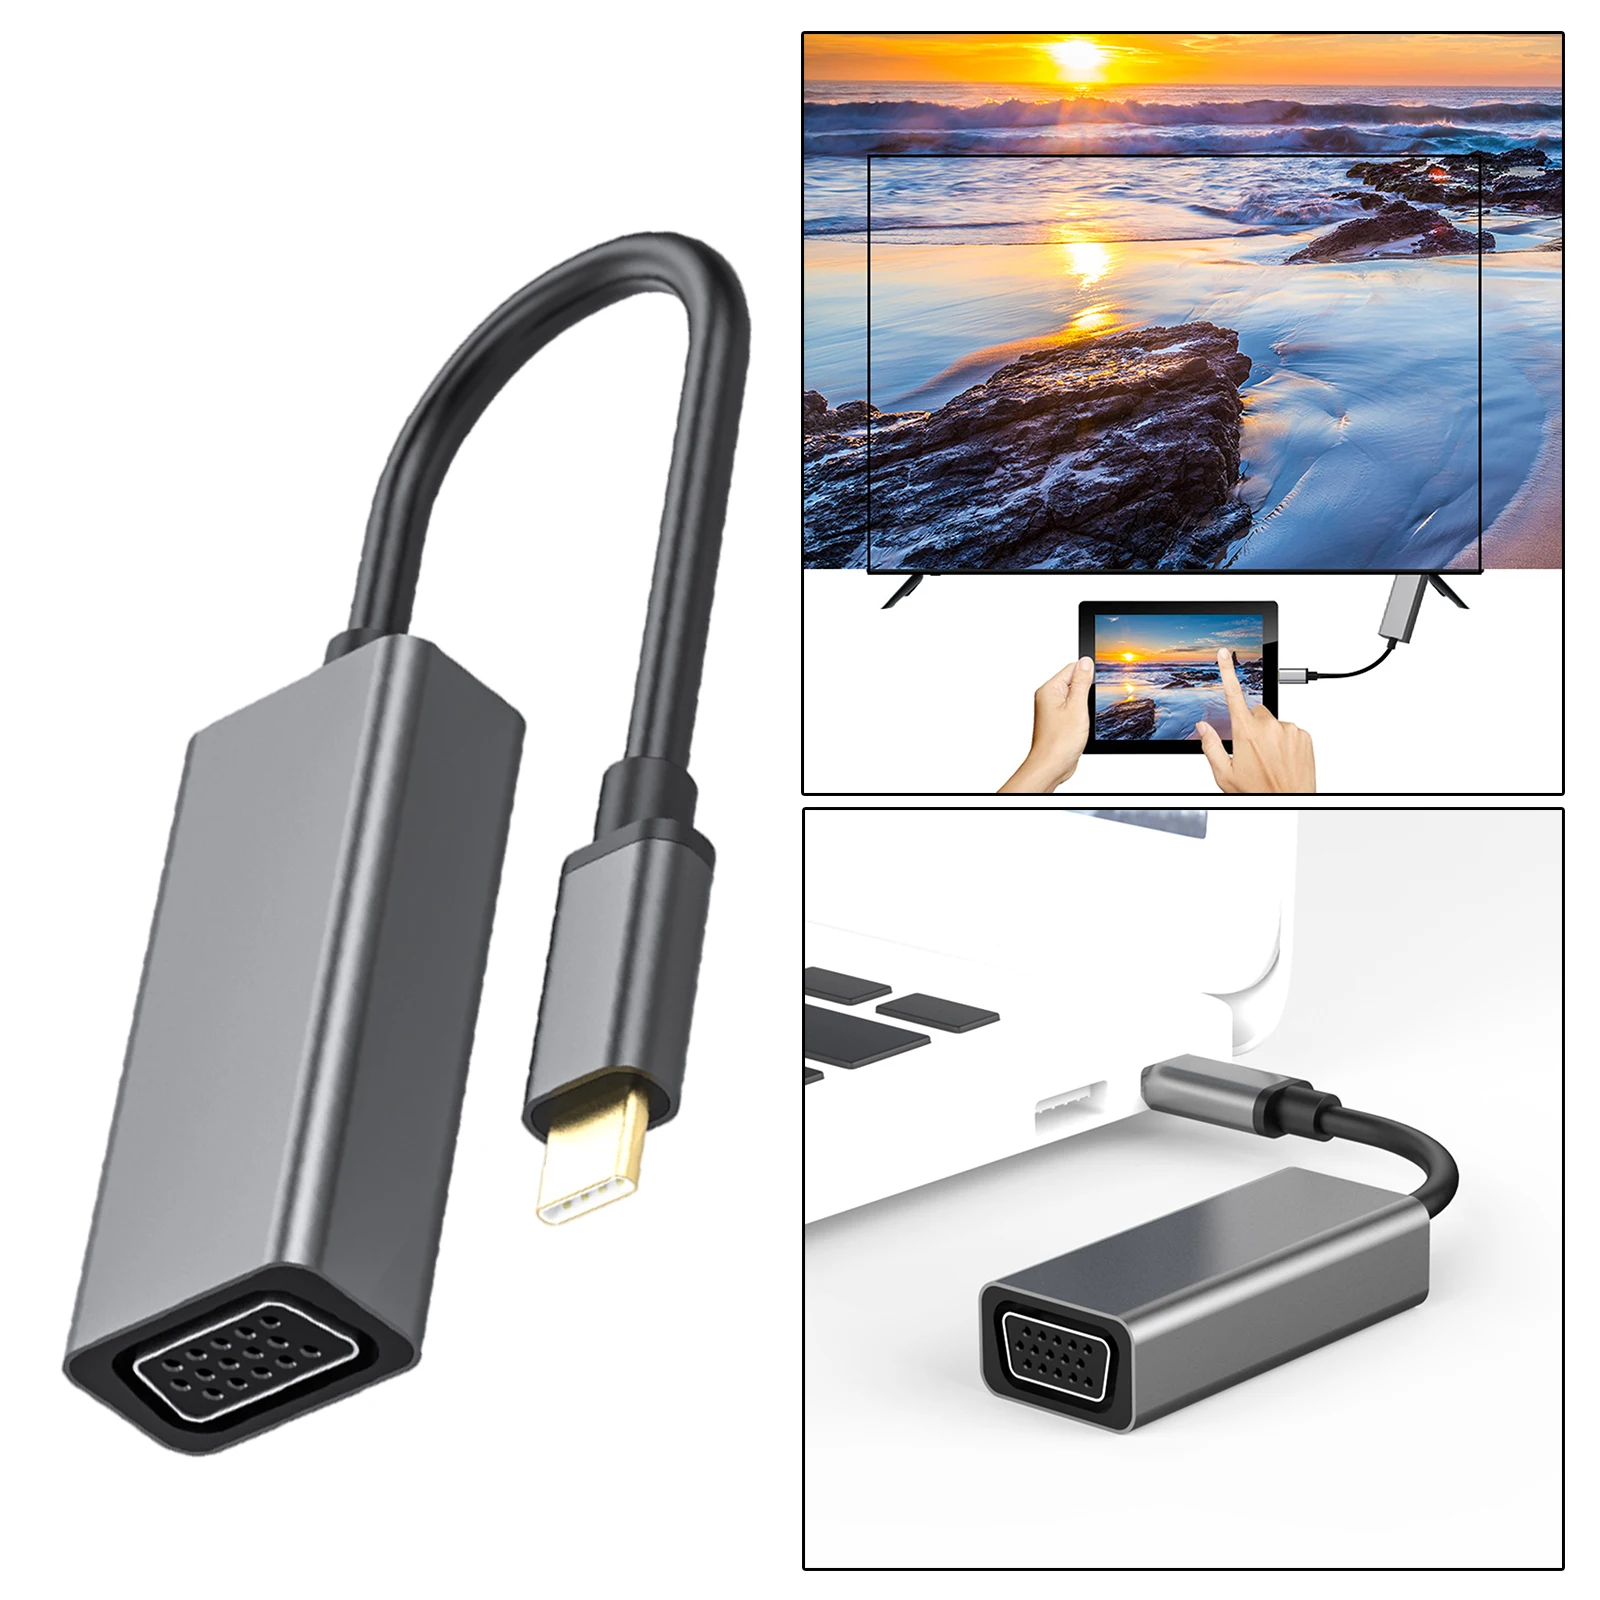 USB 3.1 to VGA Adapter Type C to VGA Converter 1920x1080 for MacBook TV Box for Microsoft Surface Projector Smartphones